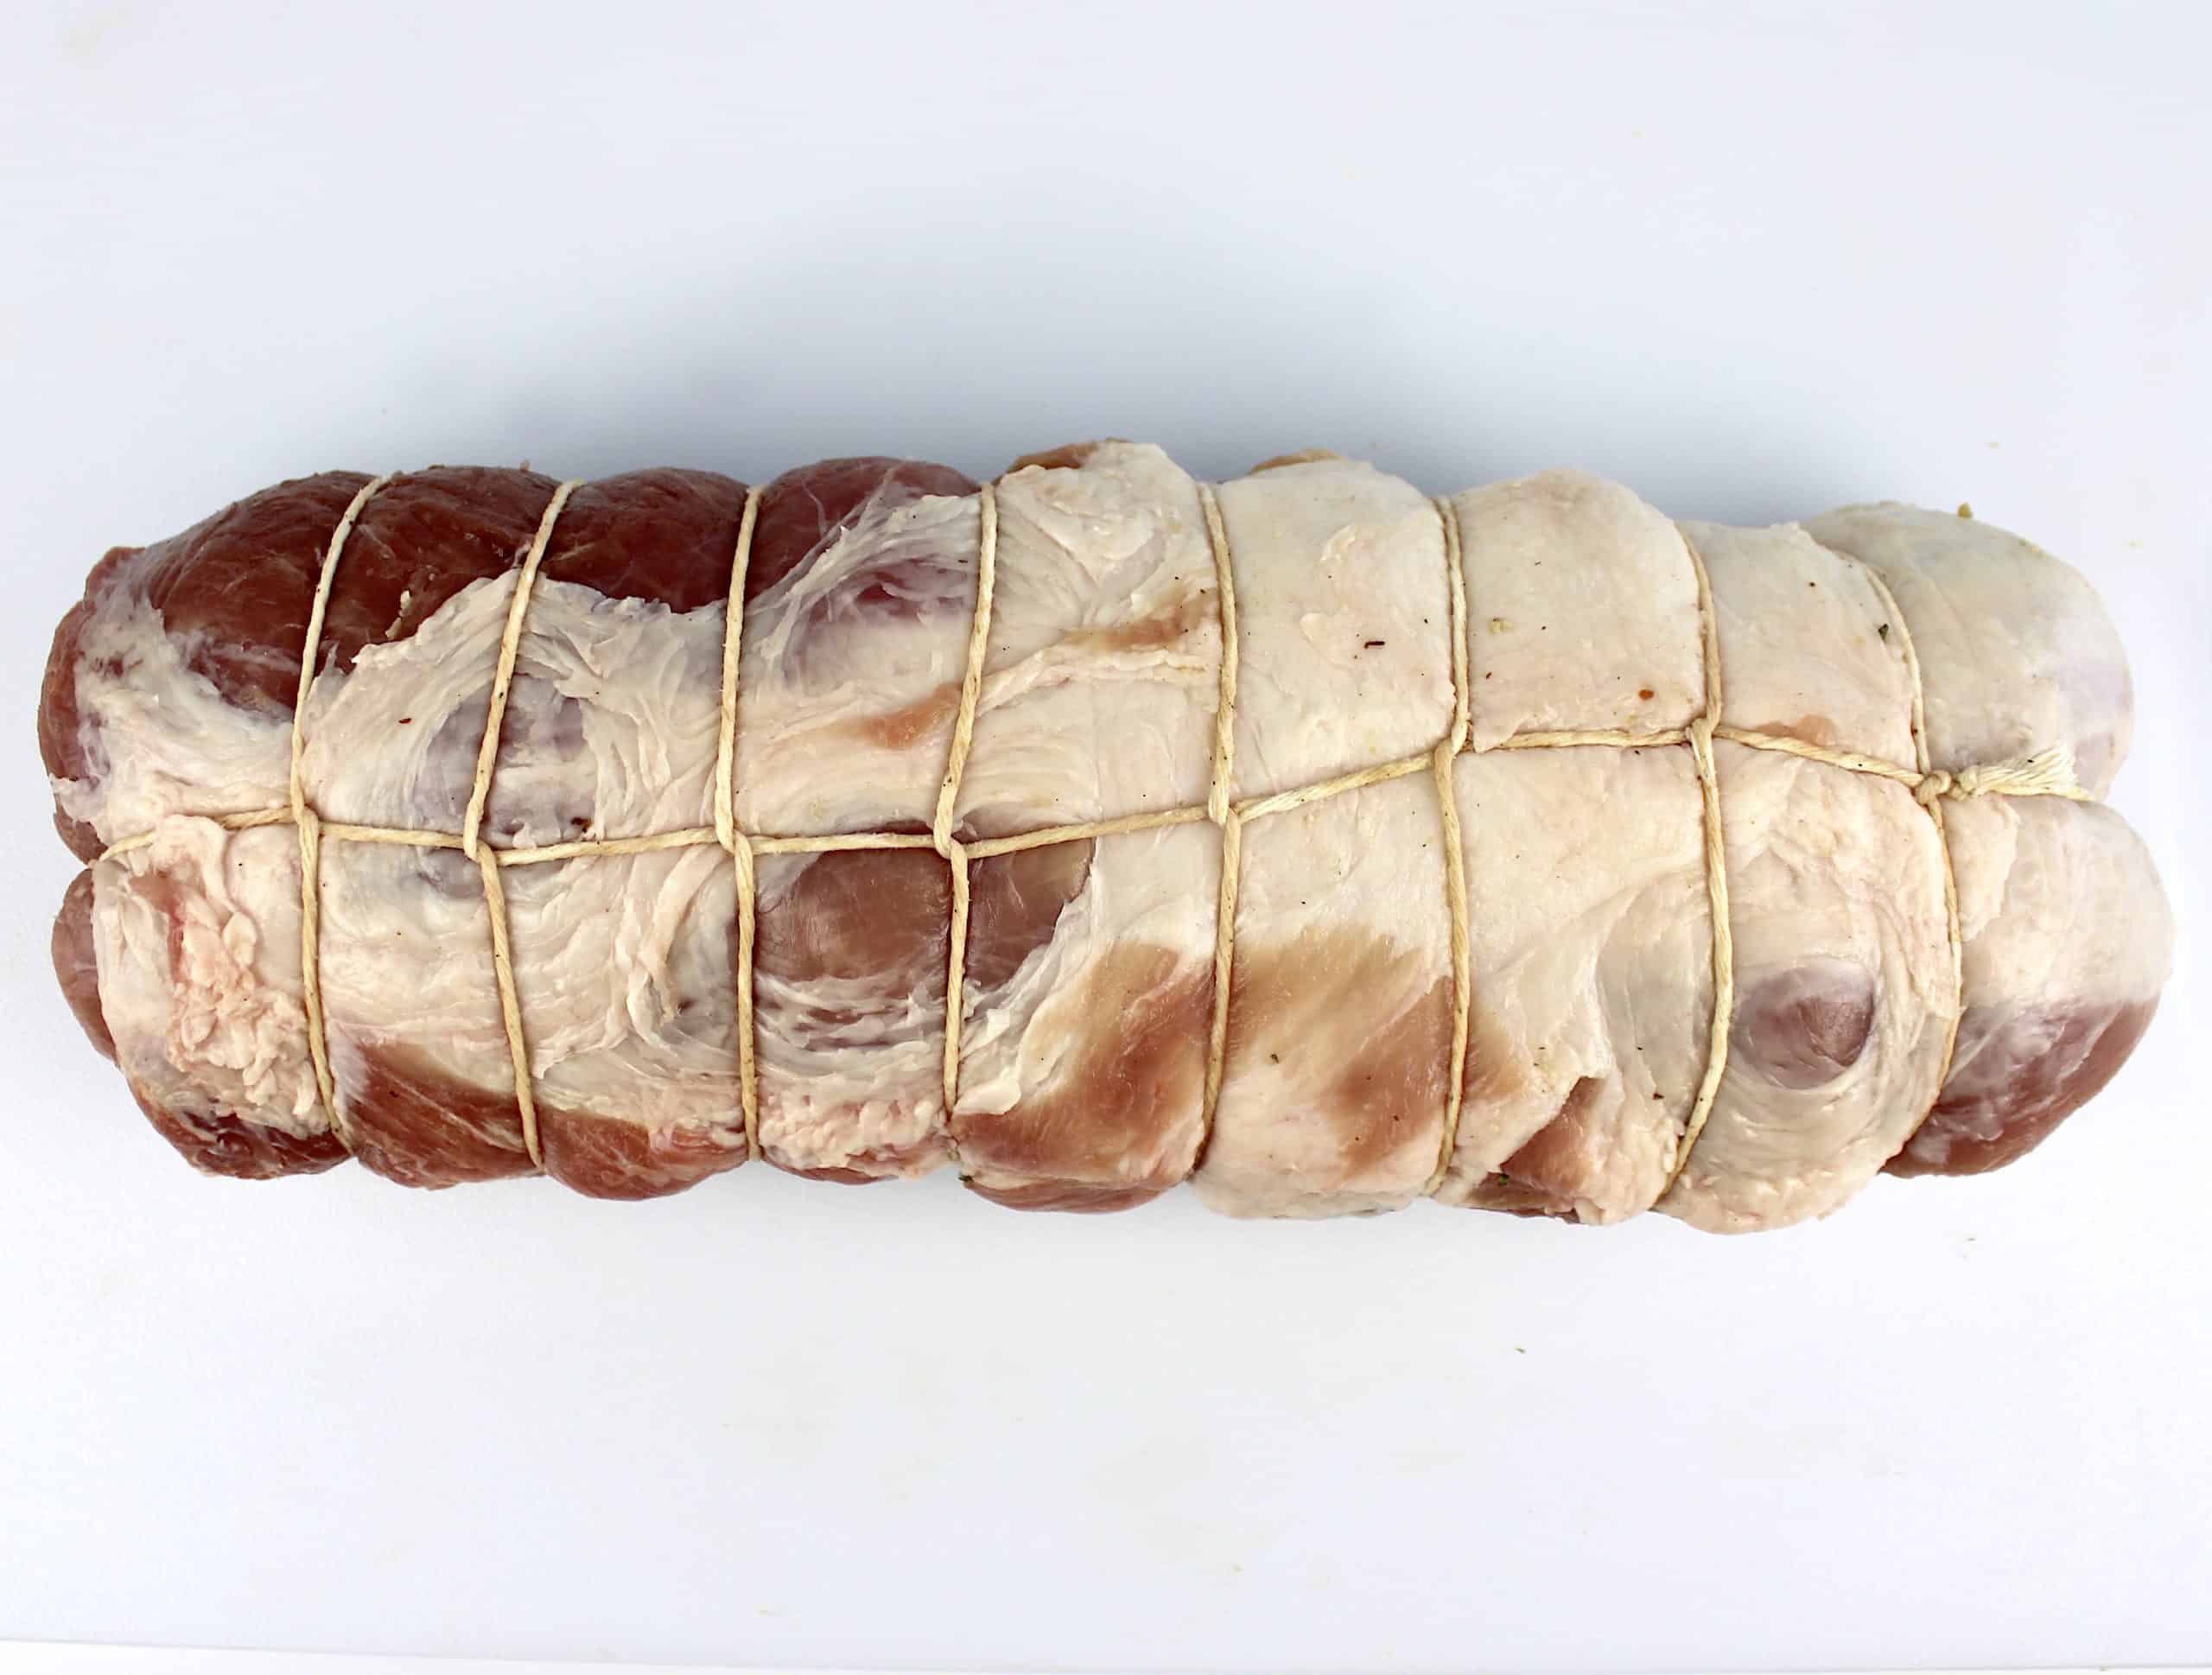 Stuffed Pork Loin rolled up with kitchen twine